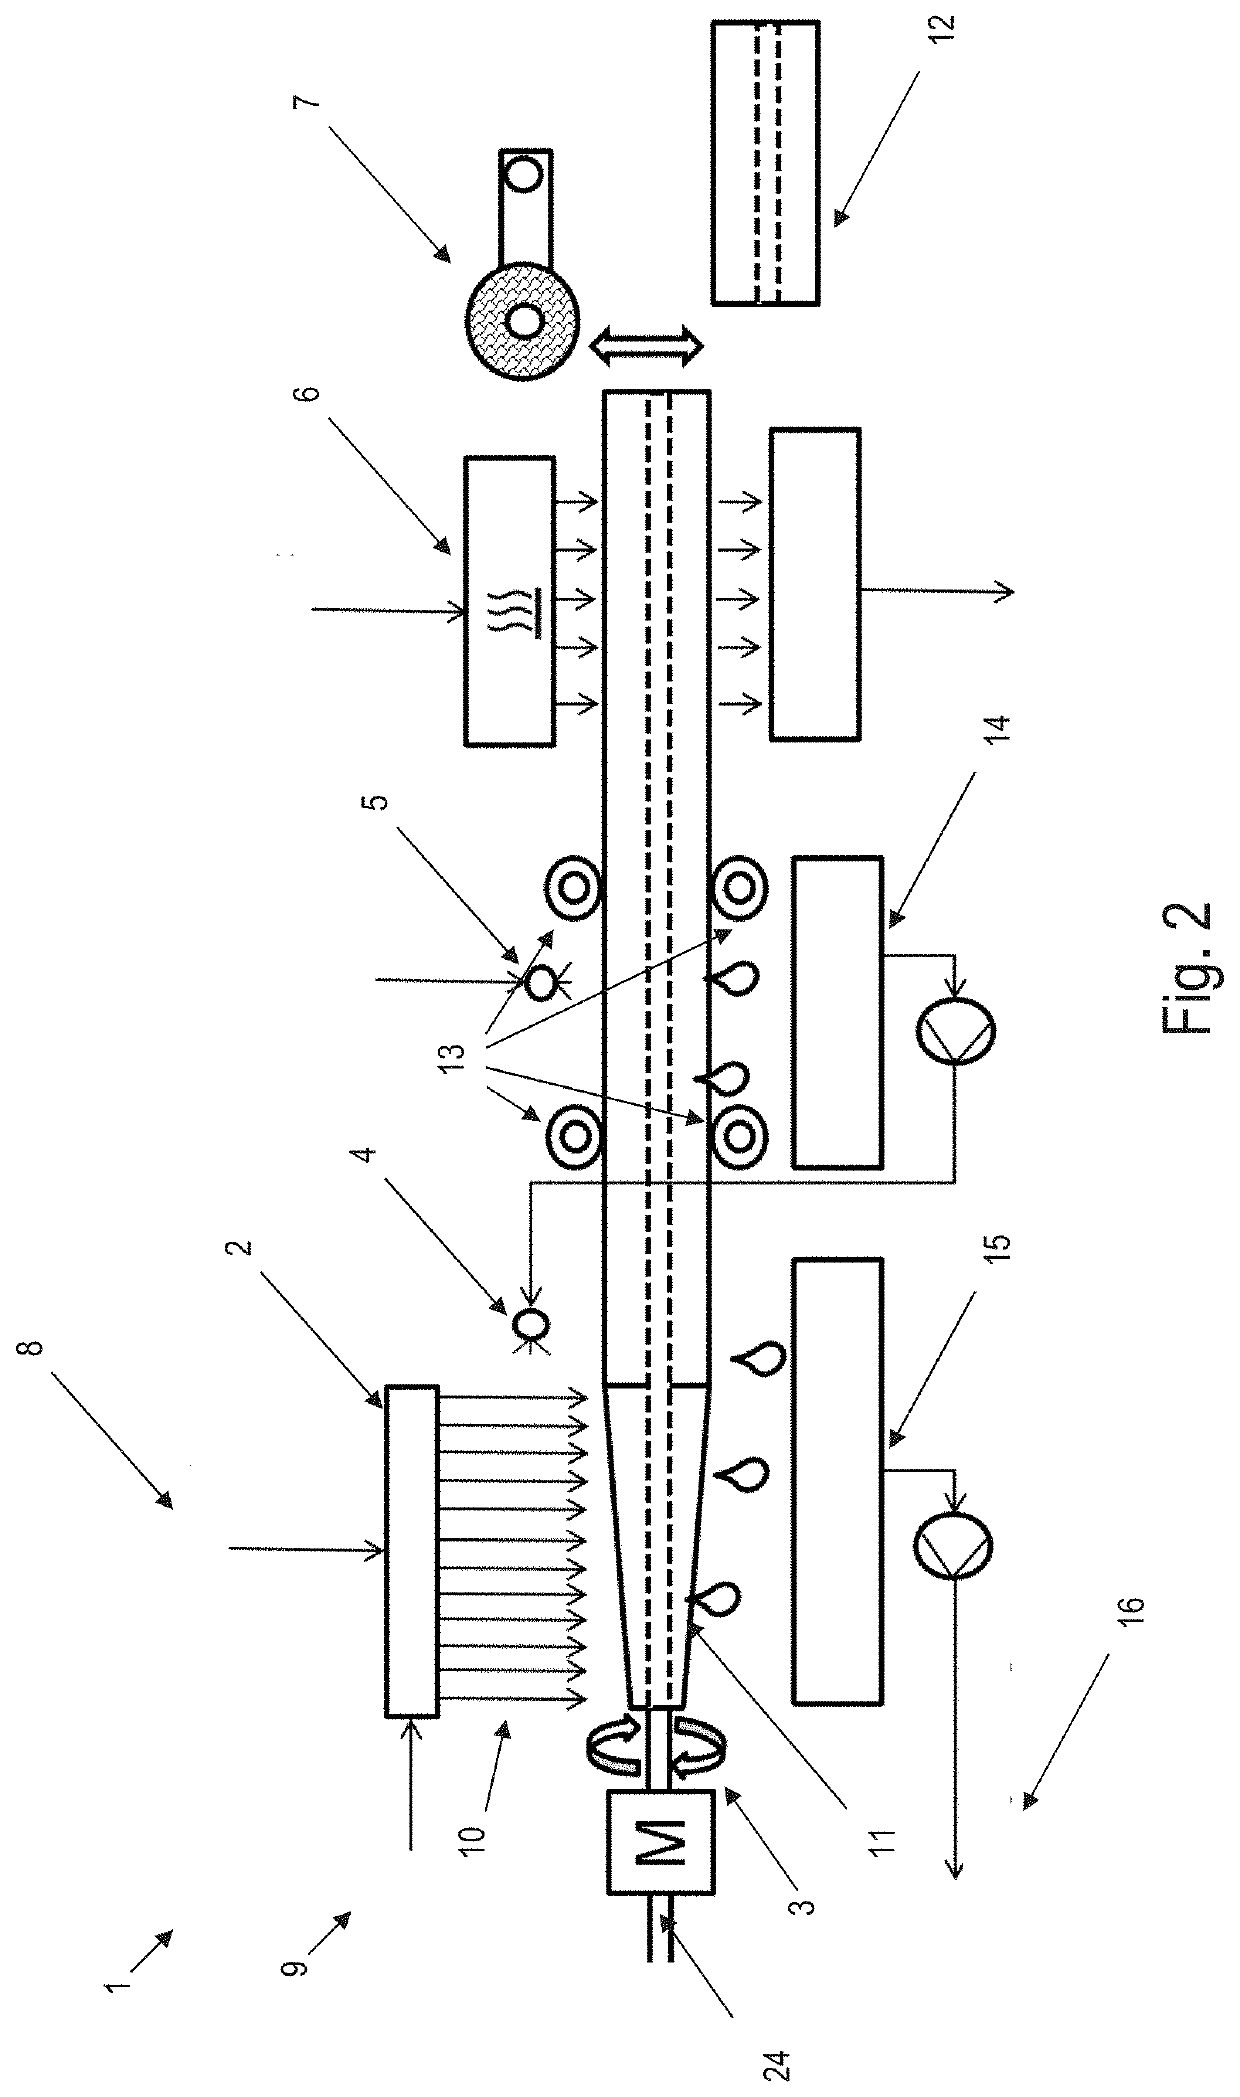 Method and device for producing tubular cellulosic spun-bonded nonwoven fabrics